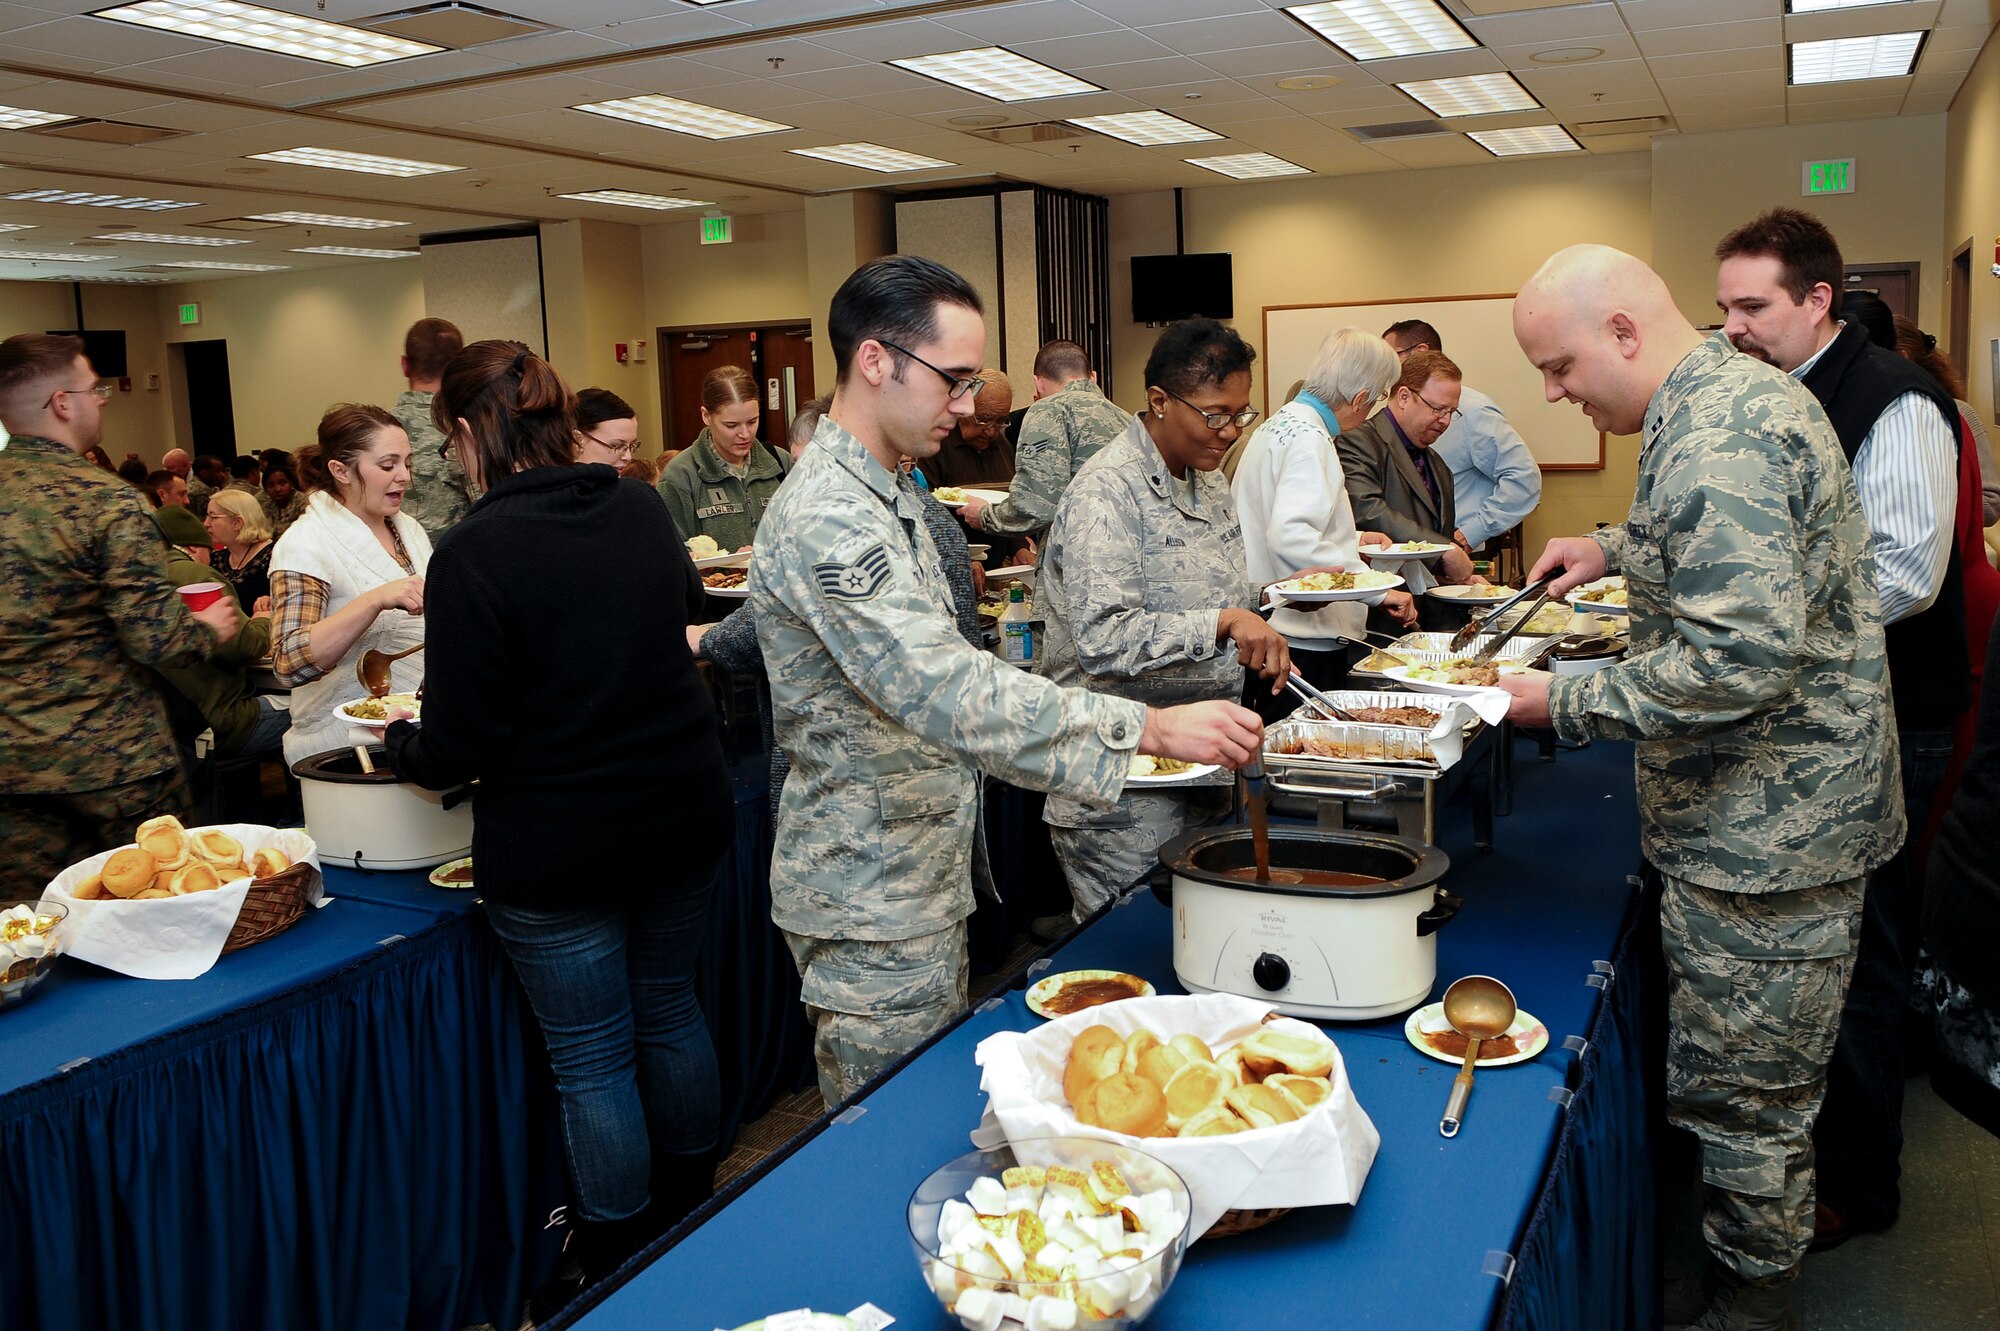 Members of Team Buckley dish up food at the National Prayer Luncheon Feb. 5, 2014, at the chapel on Buckley Air Force Base, Colo. More than 350 Team Buckley members attended the luncheon, an annual event that encourages believers of any religion to seek their God through prayer. (U.S. Air Force photo by Senior Airman Phillip Houk/Released)
